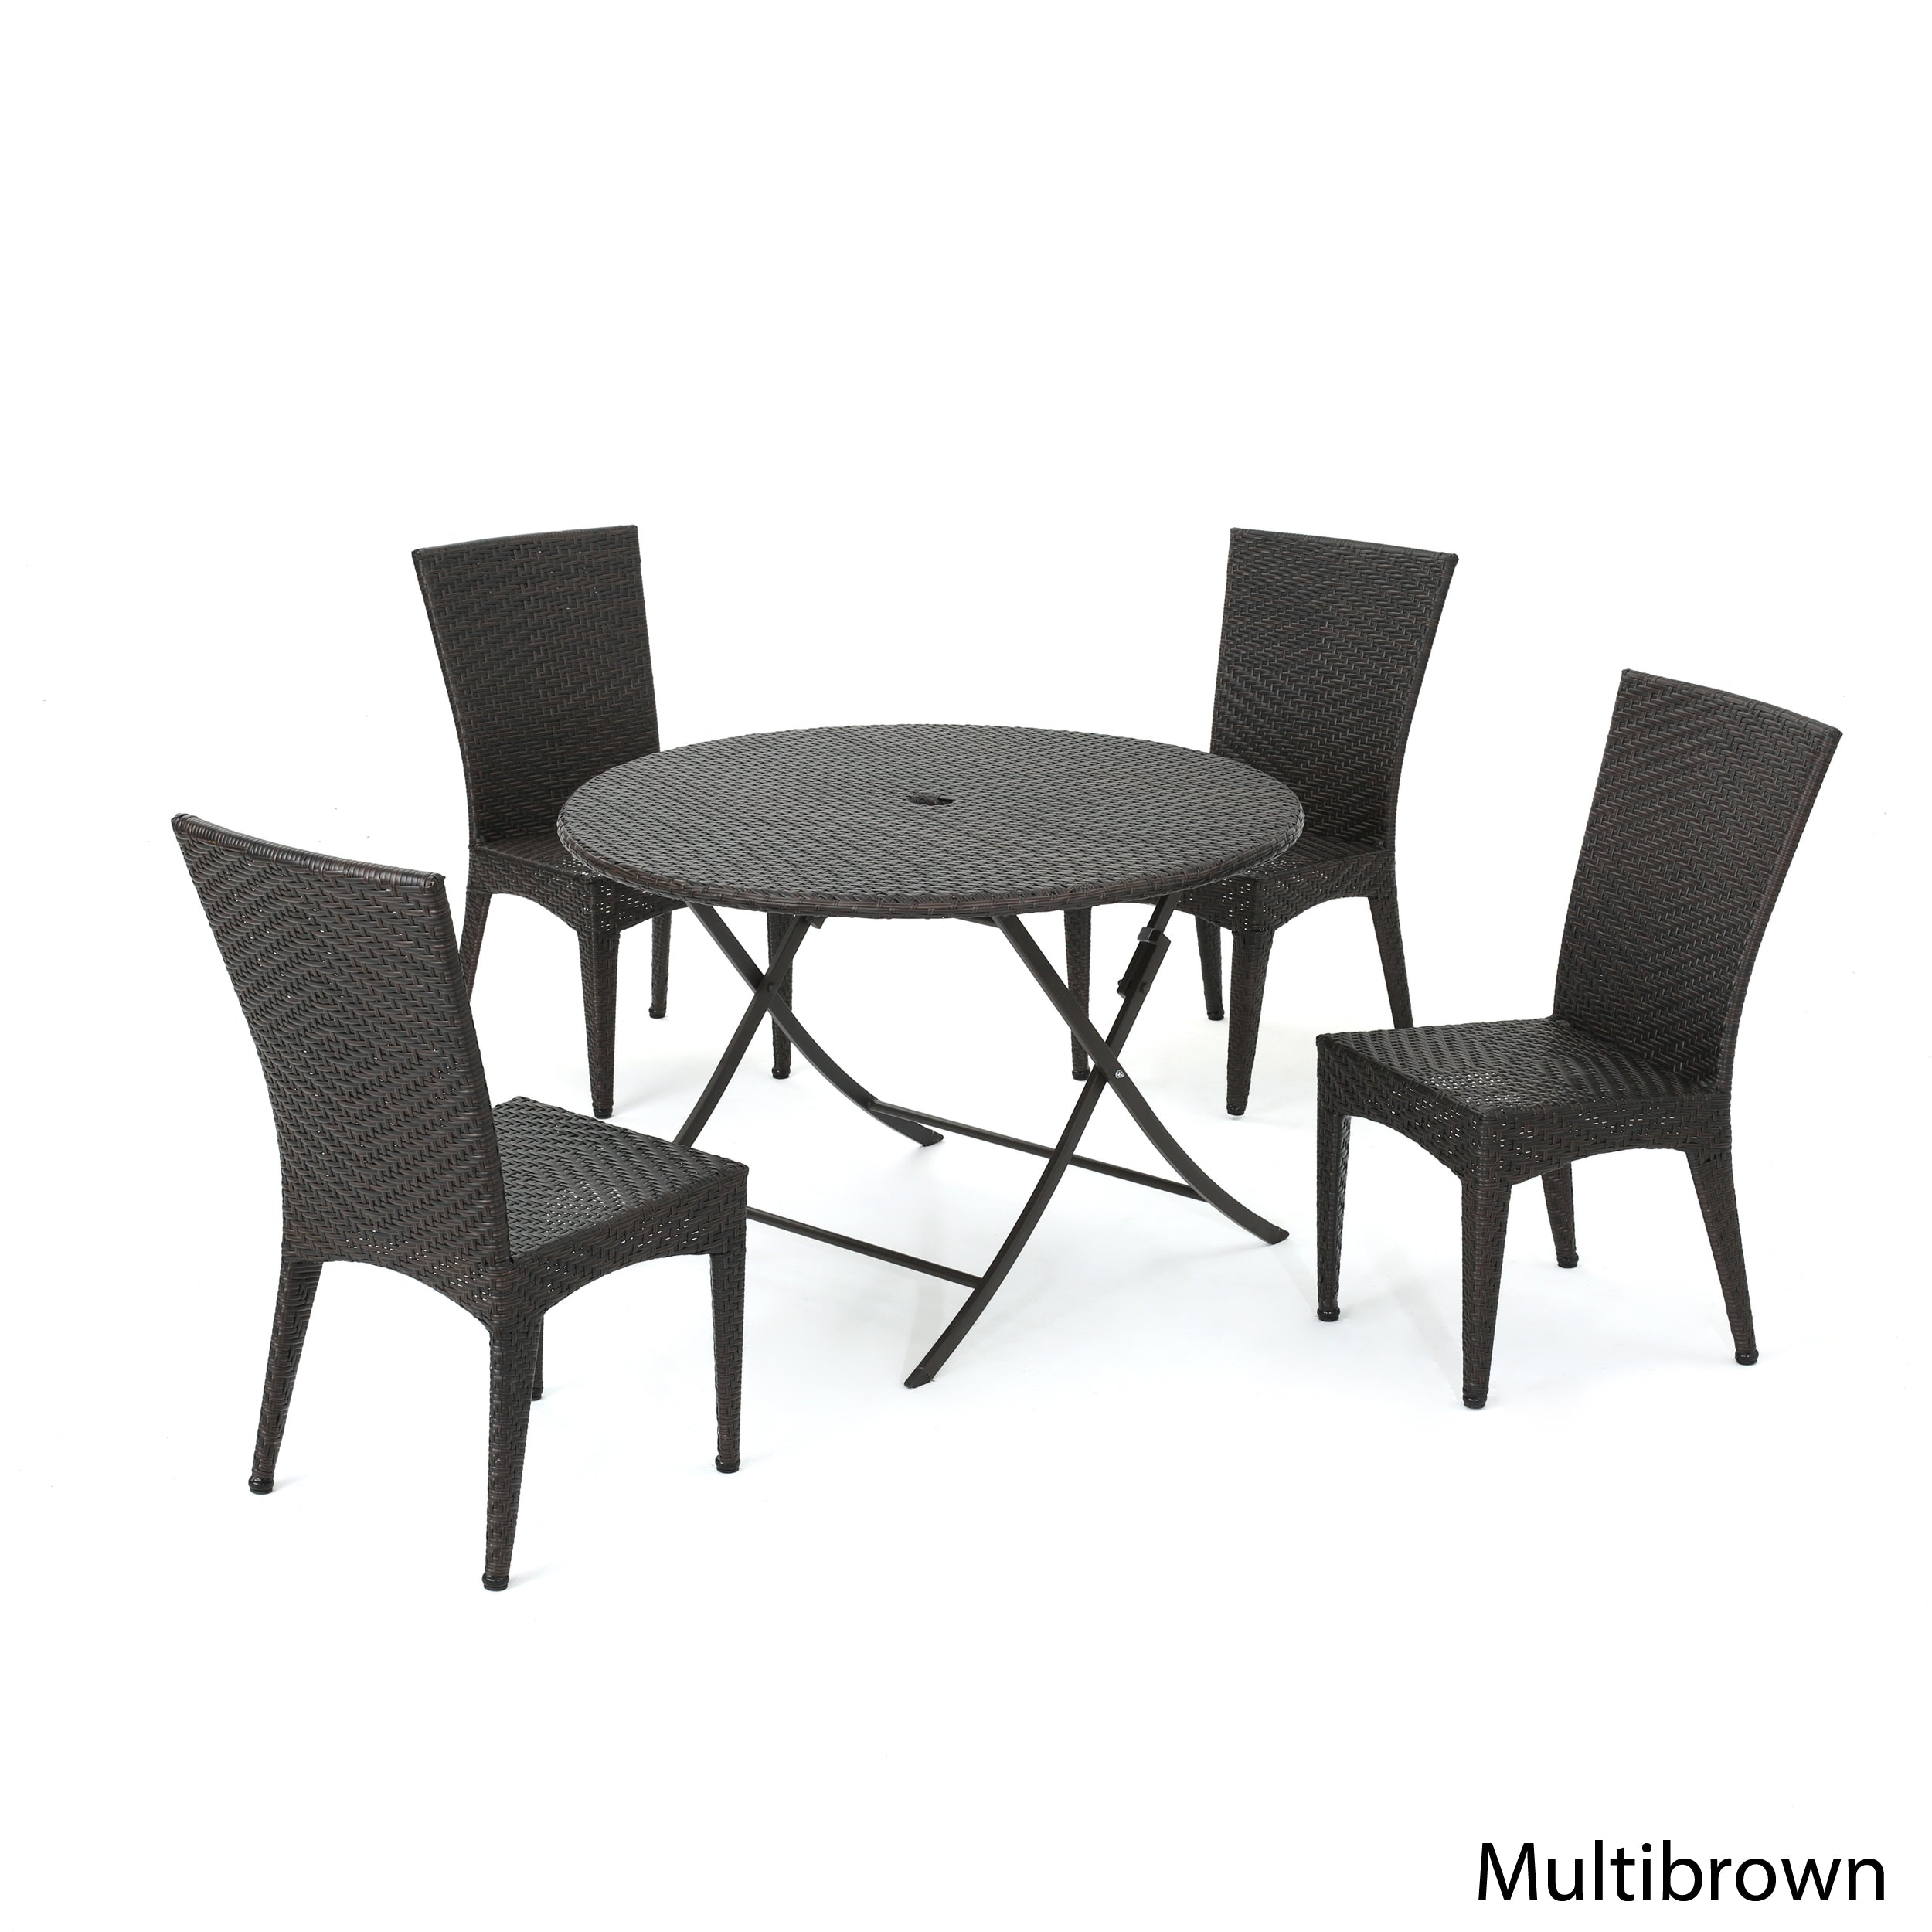 Abbey Outdoor 5 Piece Multi Brown Wicker Dining Set with Foldable Table